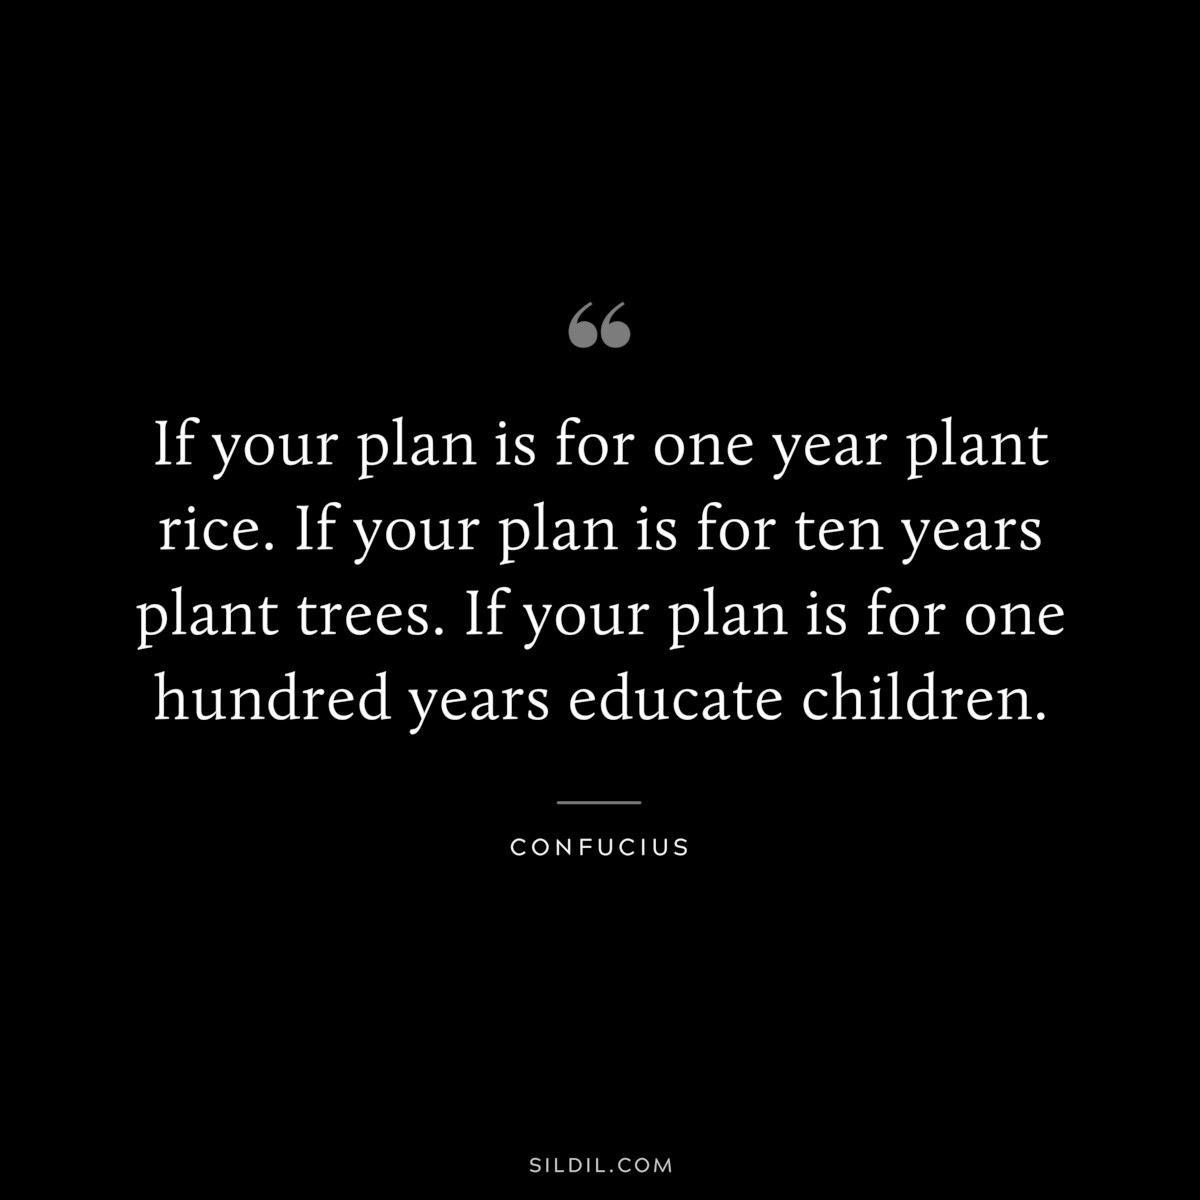 If your plan is for one year plant rice. If your plan is for ten years plant trees. If your plan is for one hundred years educate children. ― Confucius